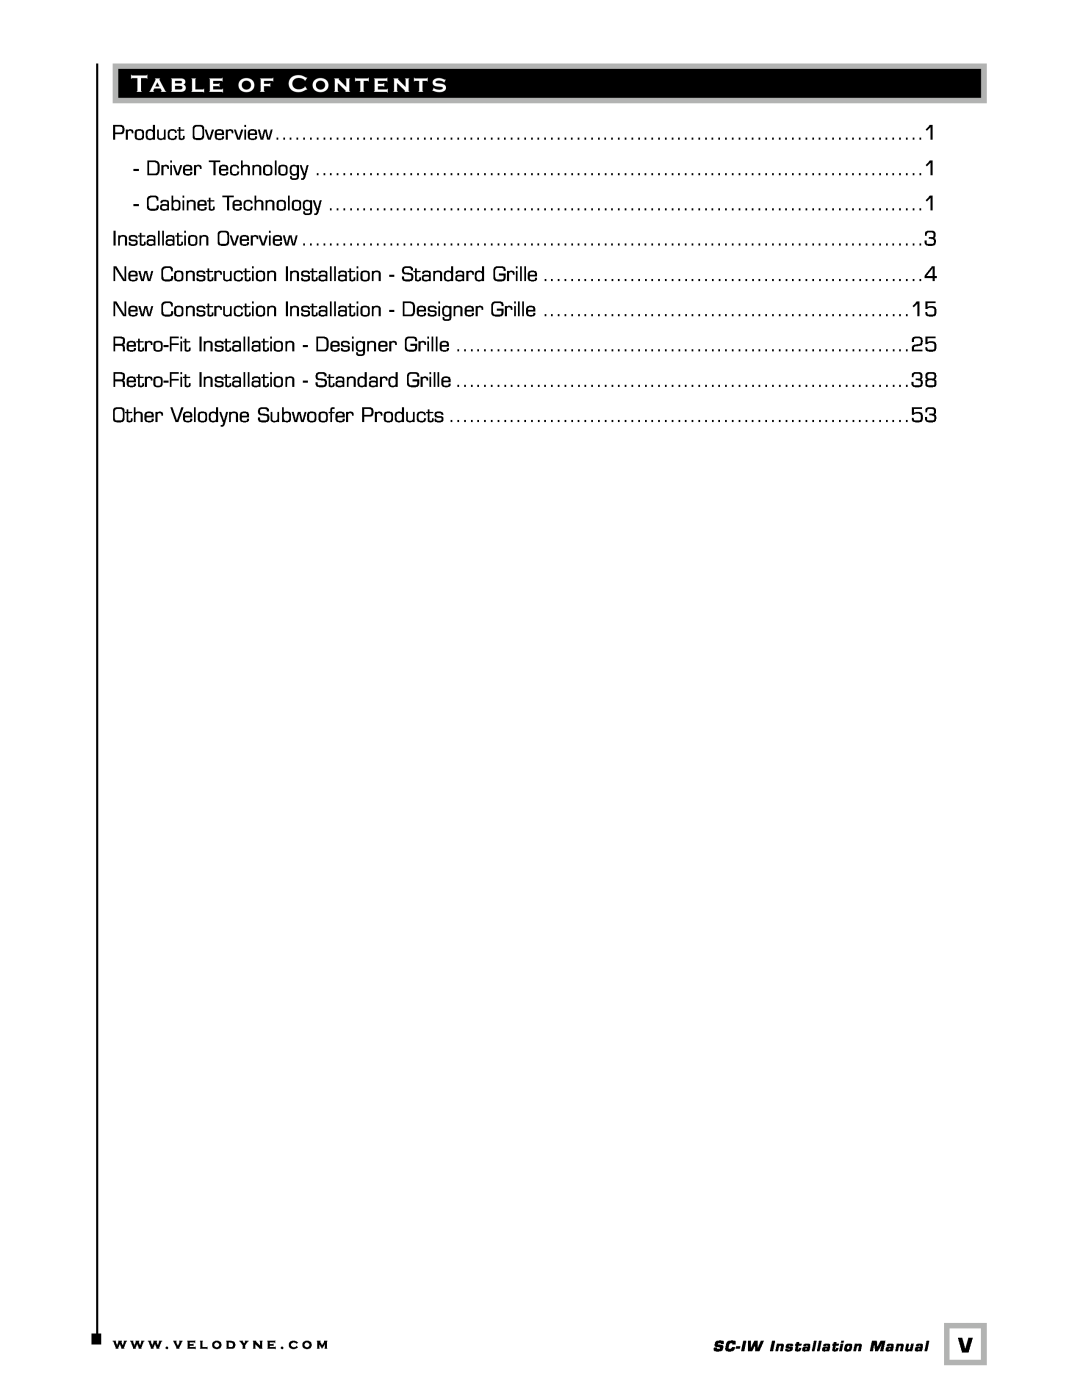 Velodyne Acoustics SC-IW installation manual Table of Contents 